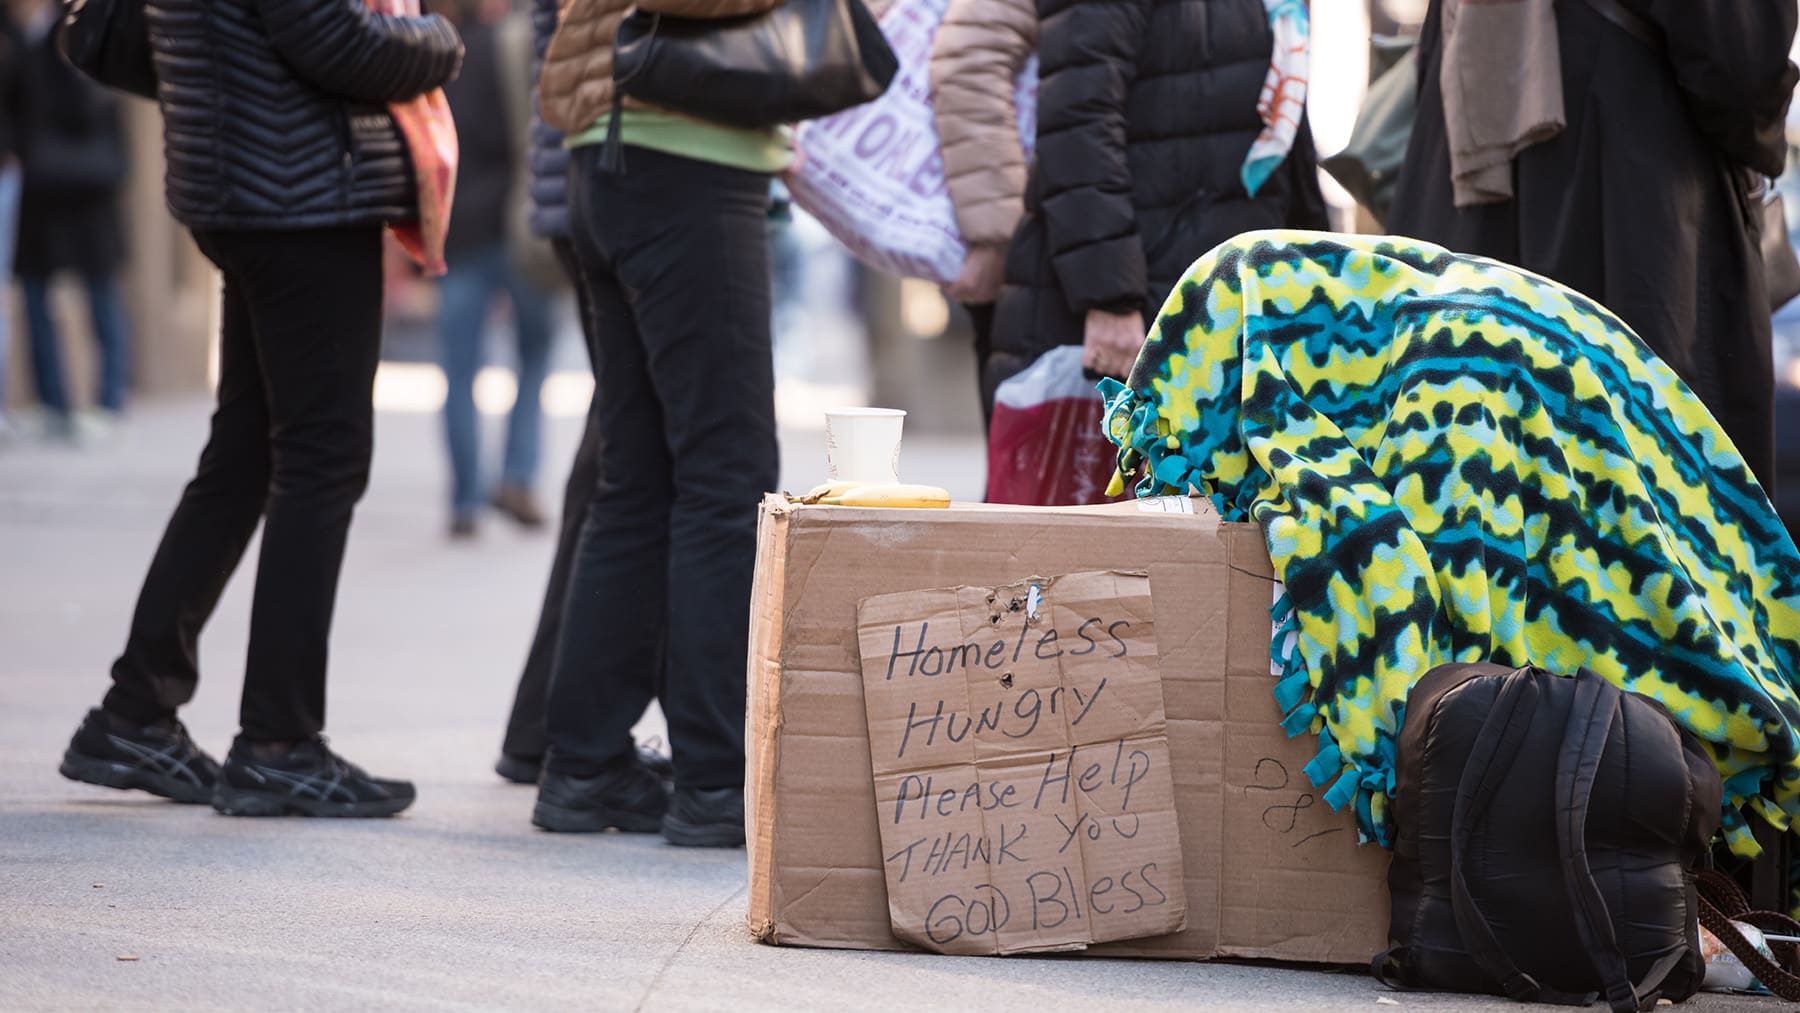 Person under a blanket with a sign asking for help as people walk past.